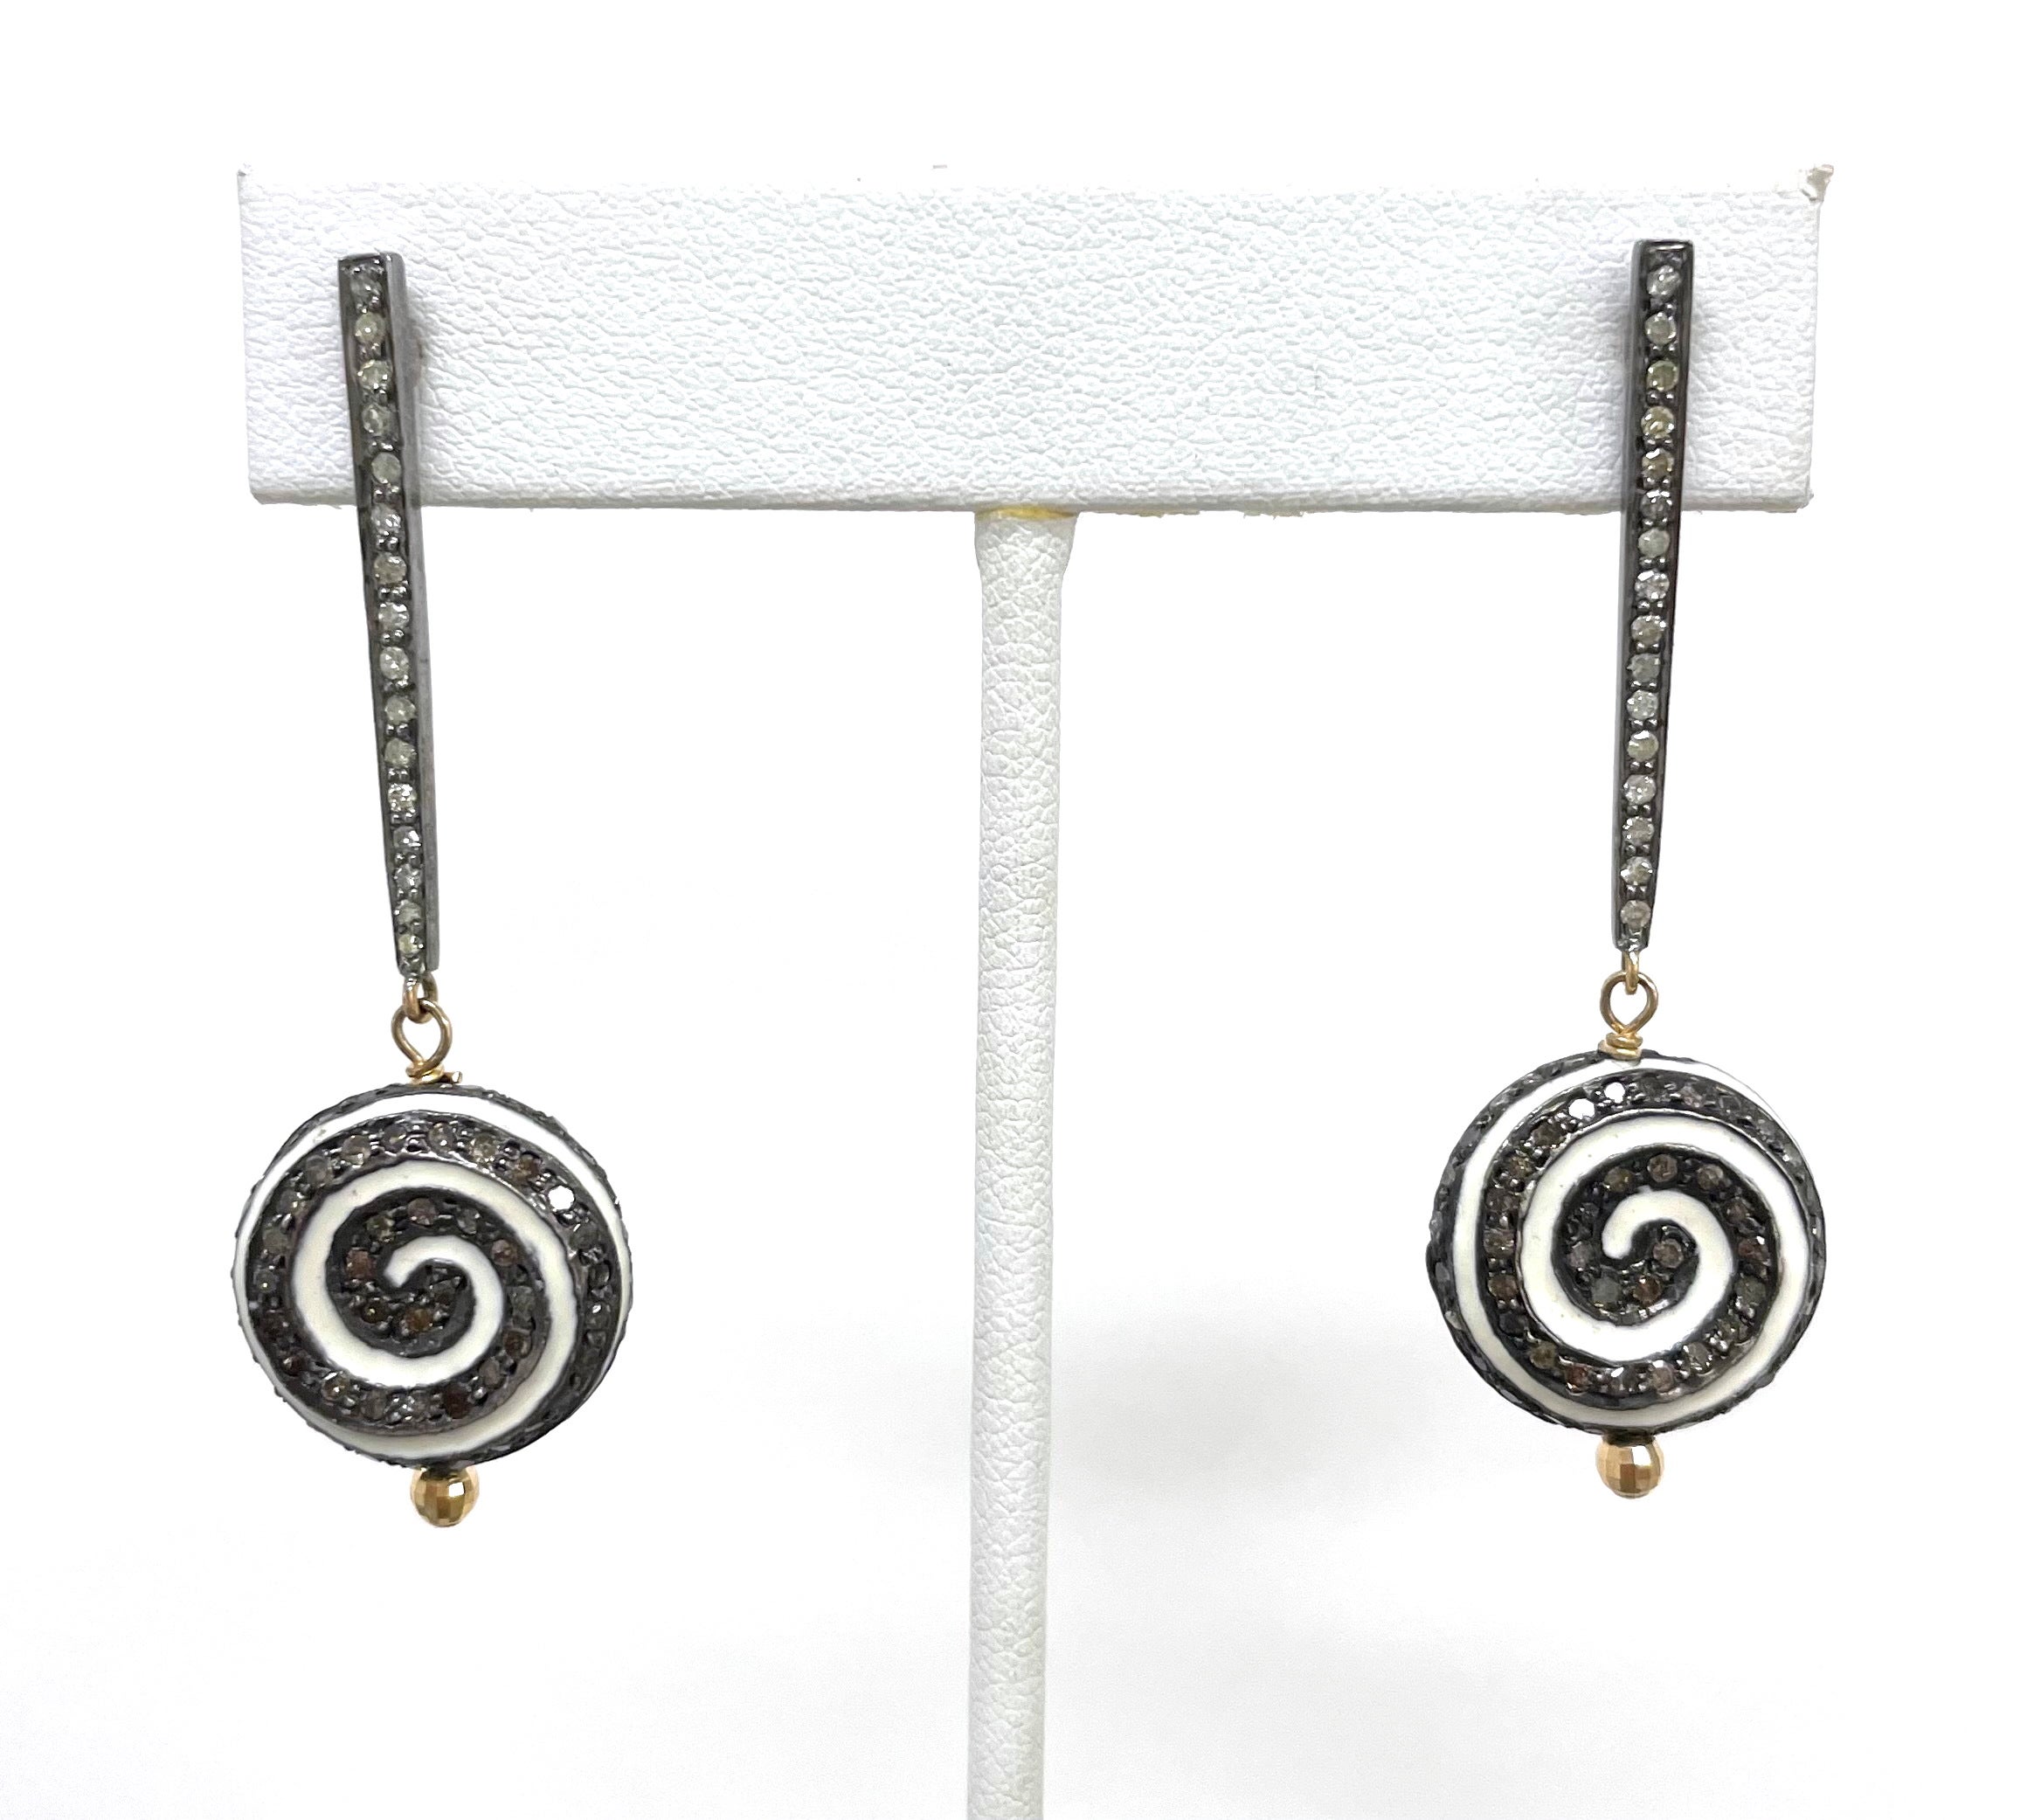 Description
Stylish enamel and pave diamond pinwheel design whimsical earrings.
Item # E2929

Materials and Weight
Ivory color Enamel 16.8 mm
Pave diamonds 2.47 cts.
Rhodium sterling silver
14k posts and jumbo back 

Dimensions 
Length 2